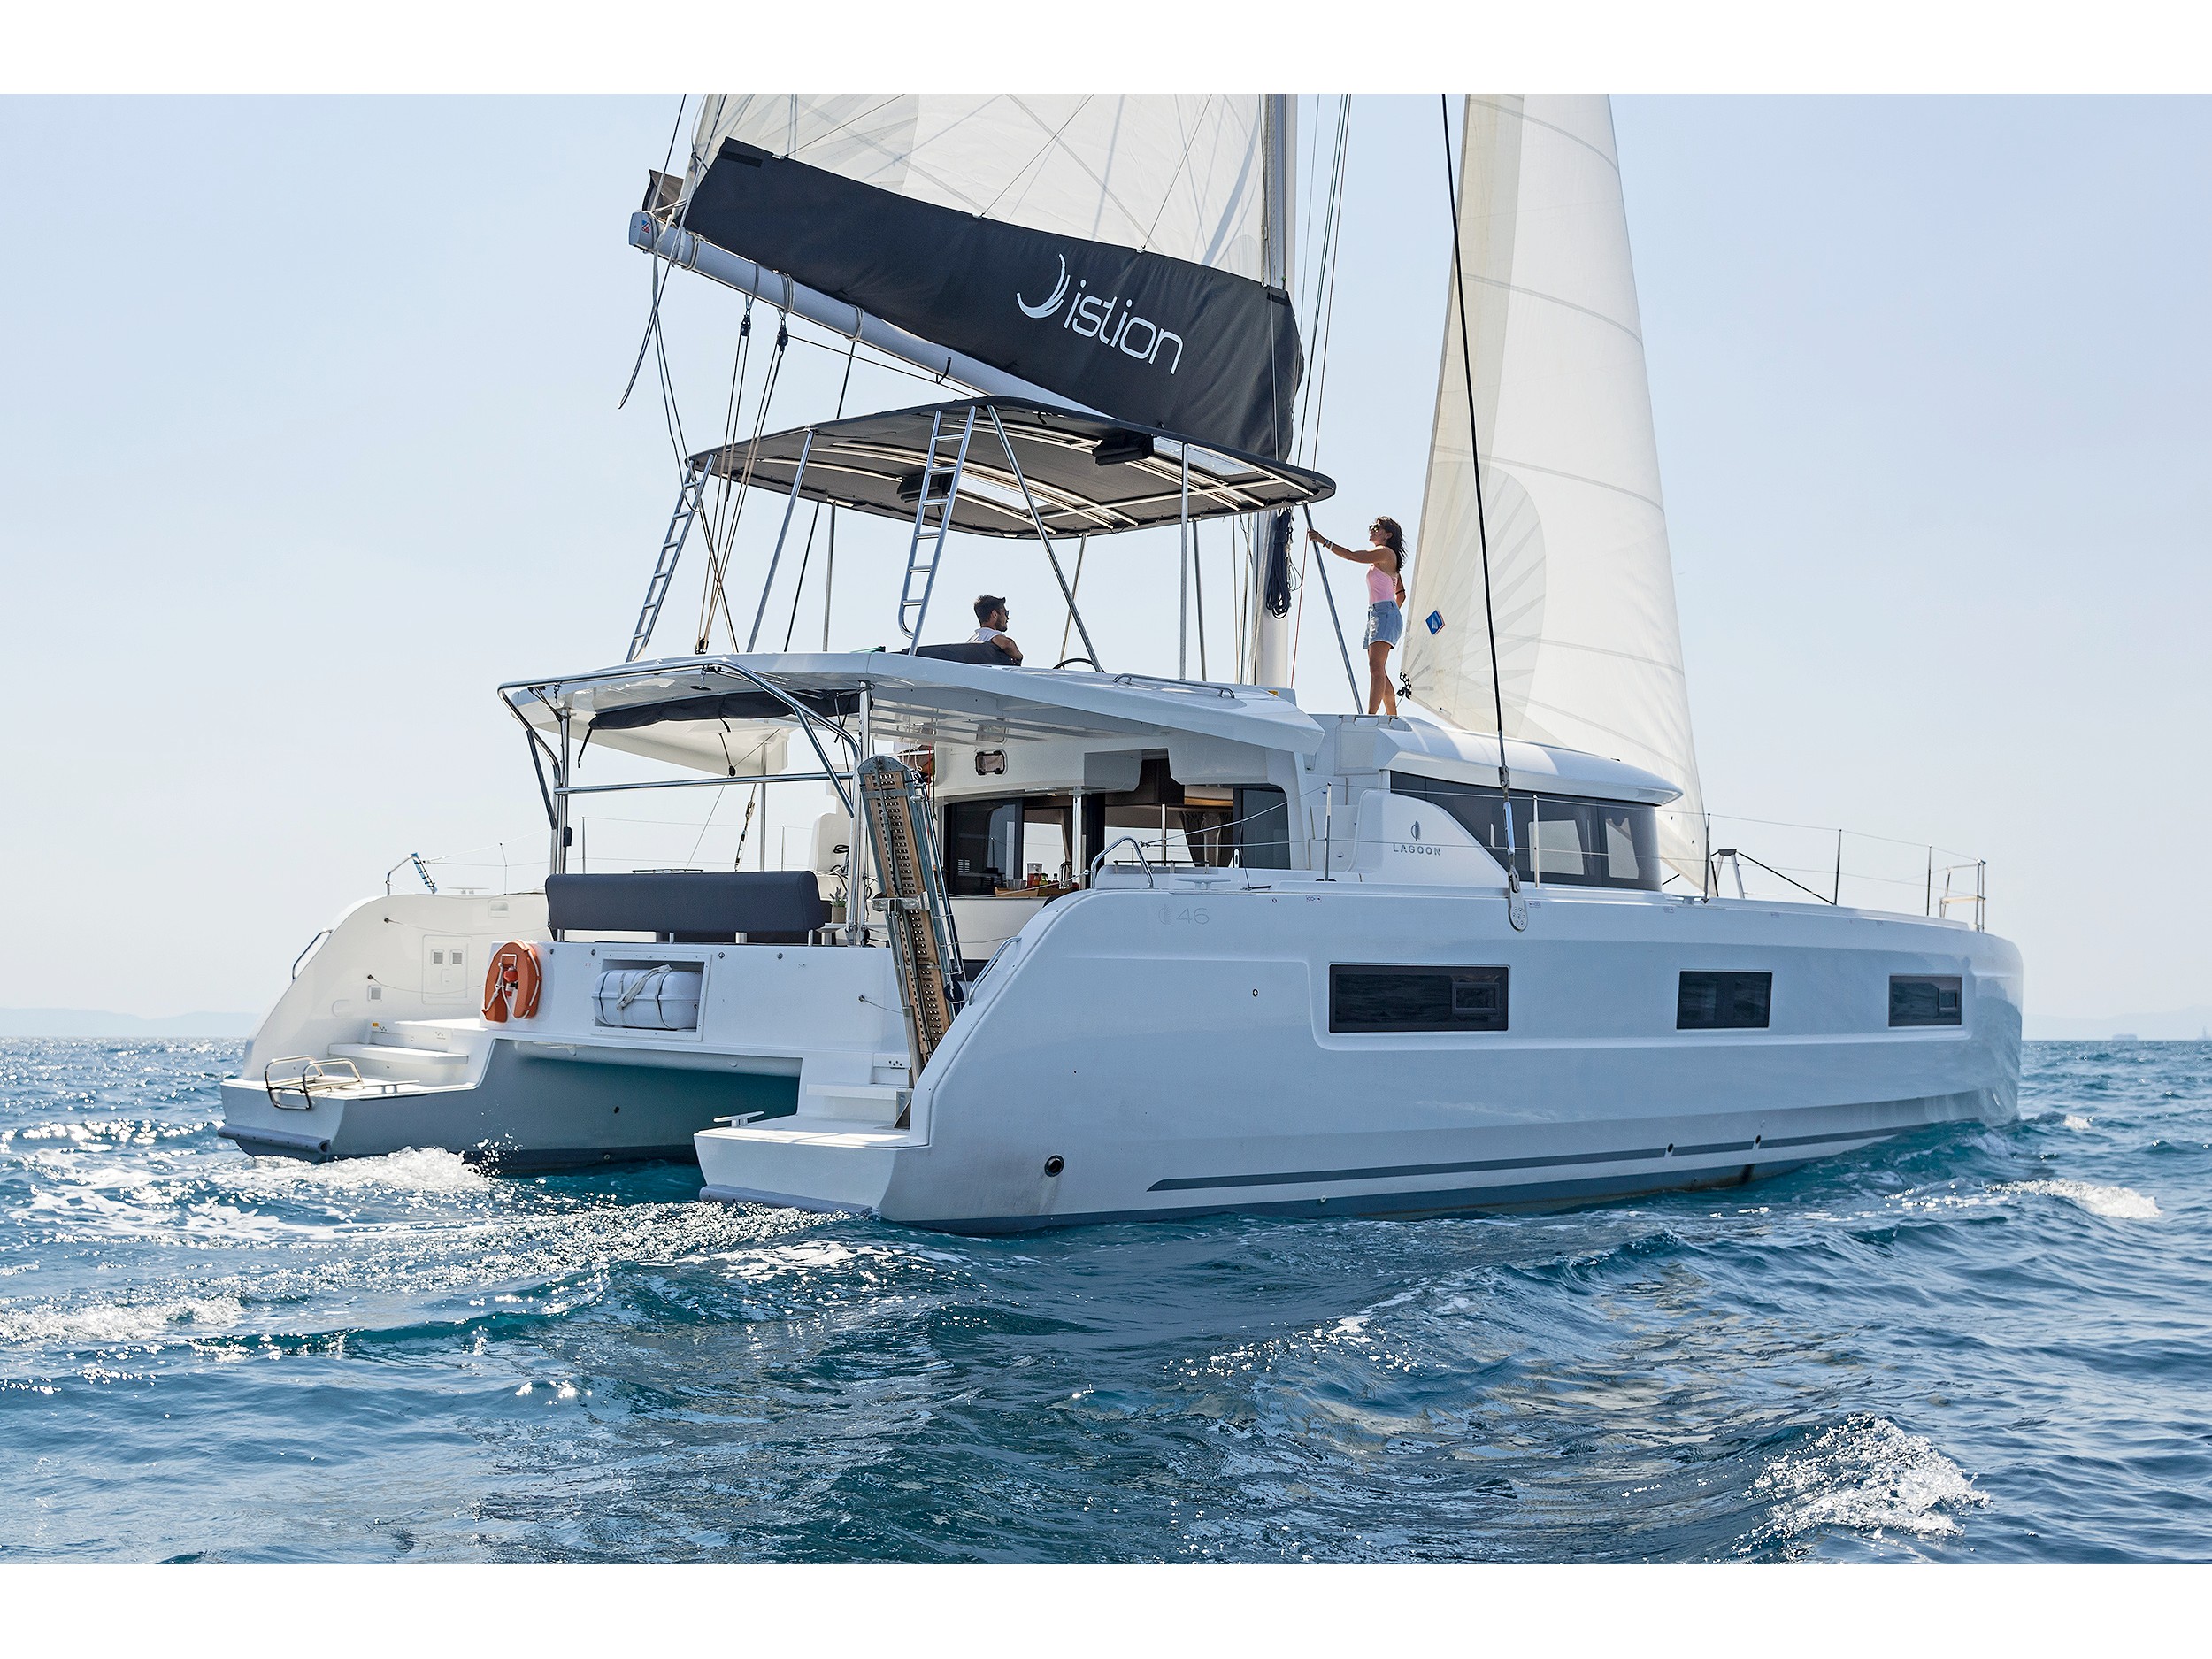 Lagoon 46  - Yacht Charter  La Trinite-sur-mer & Boat hire in Greece Athens and Saronic Gulf Athens Alimos Alimos Marina 2